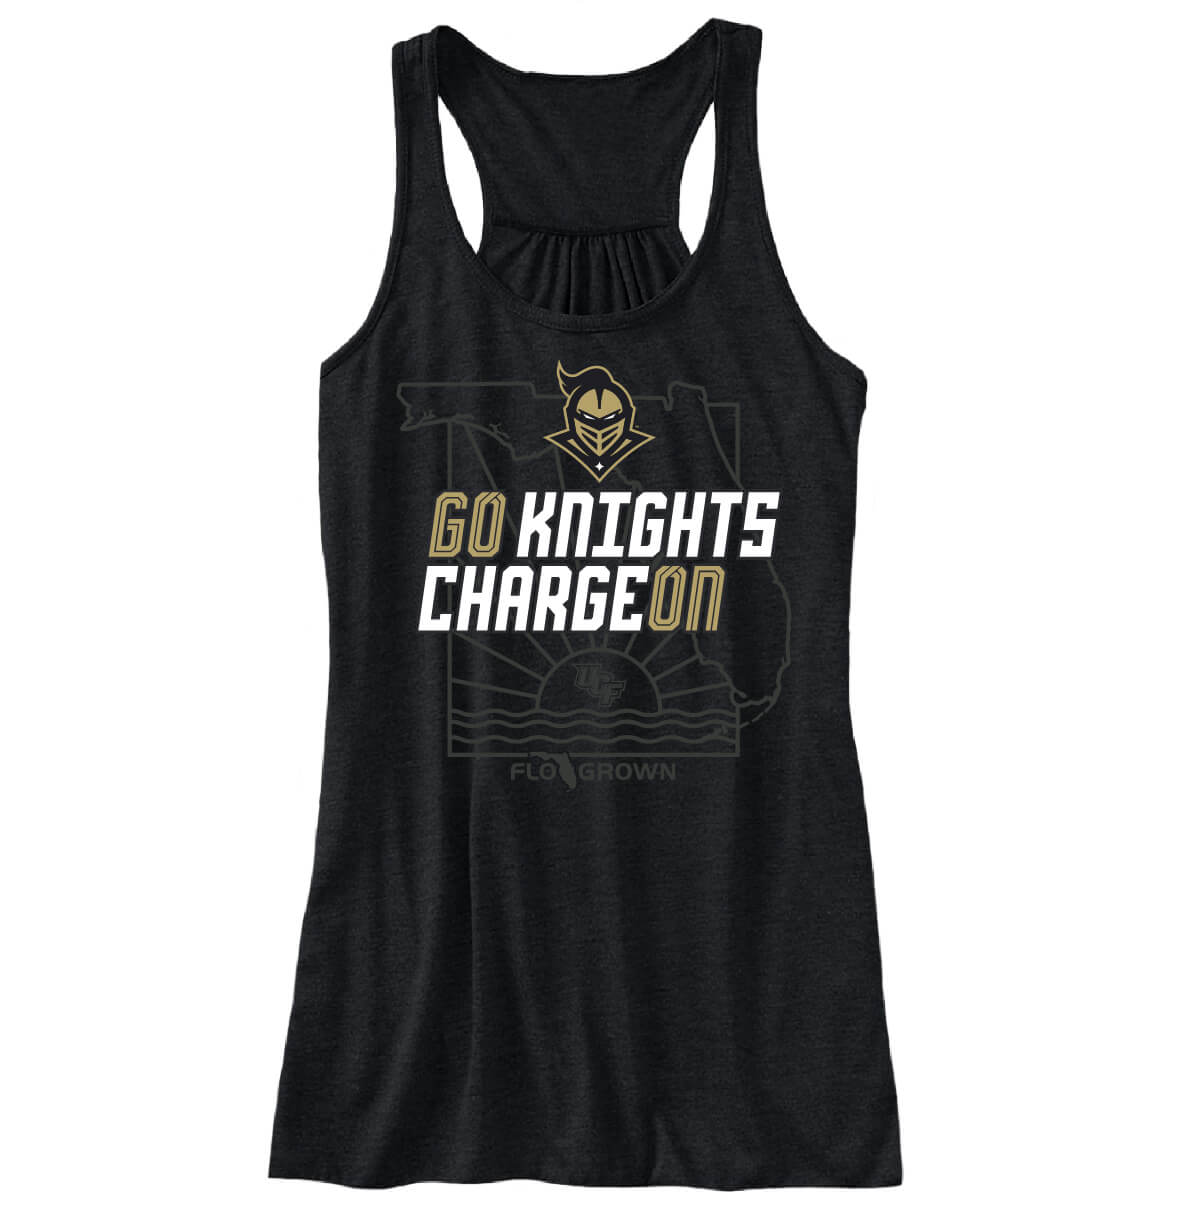 UCF Knights Charge On Poster Women's Tank